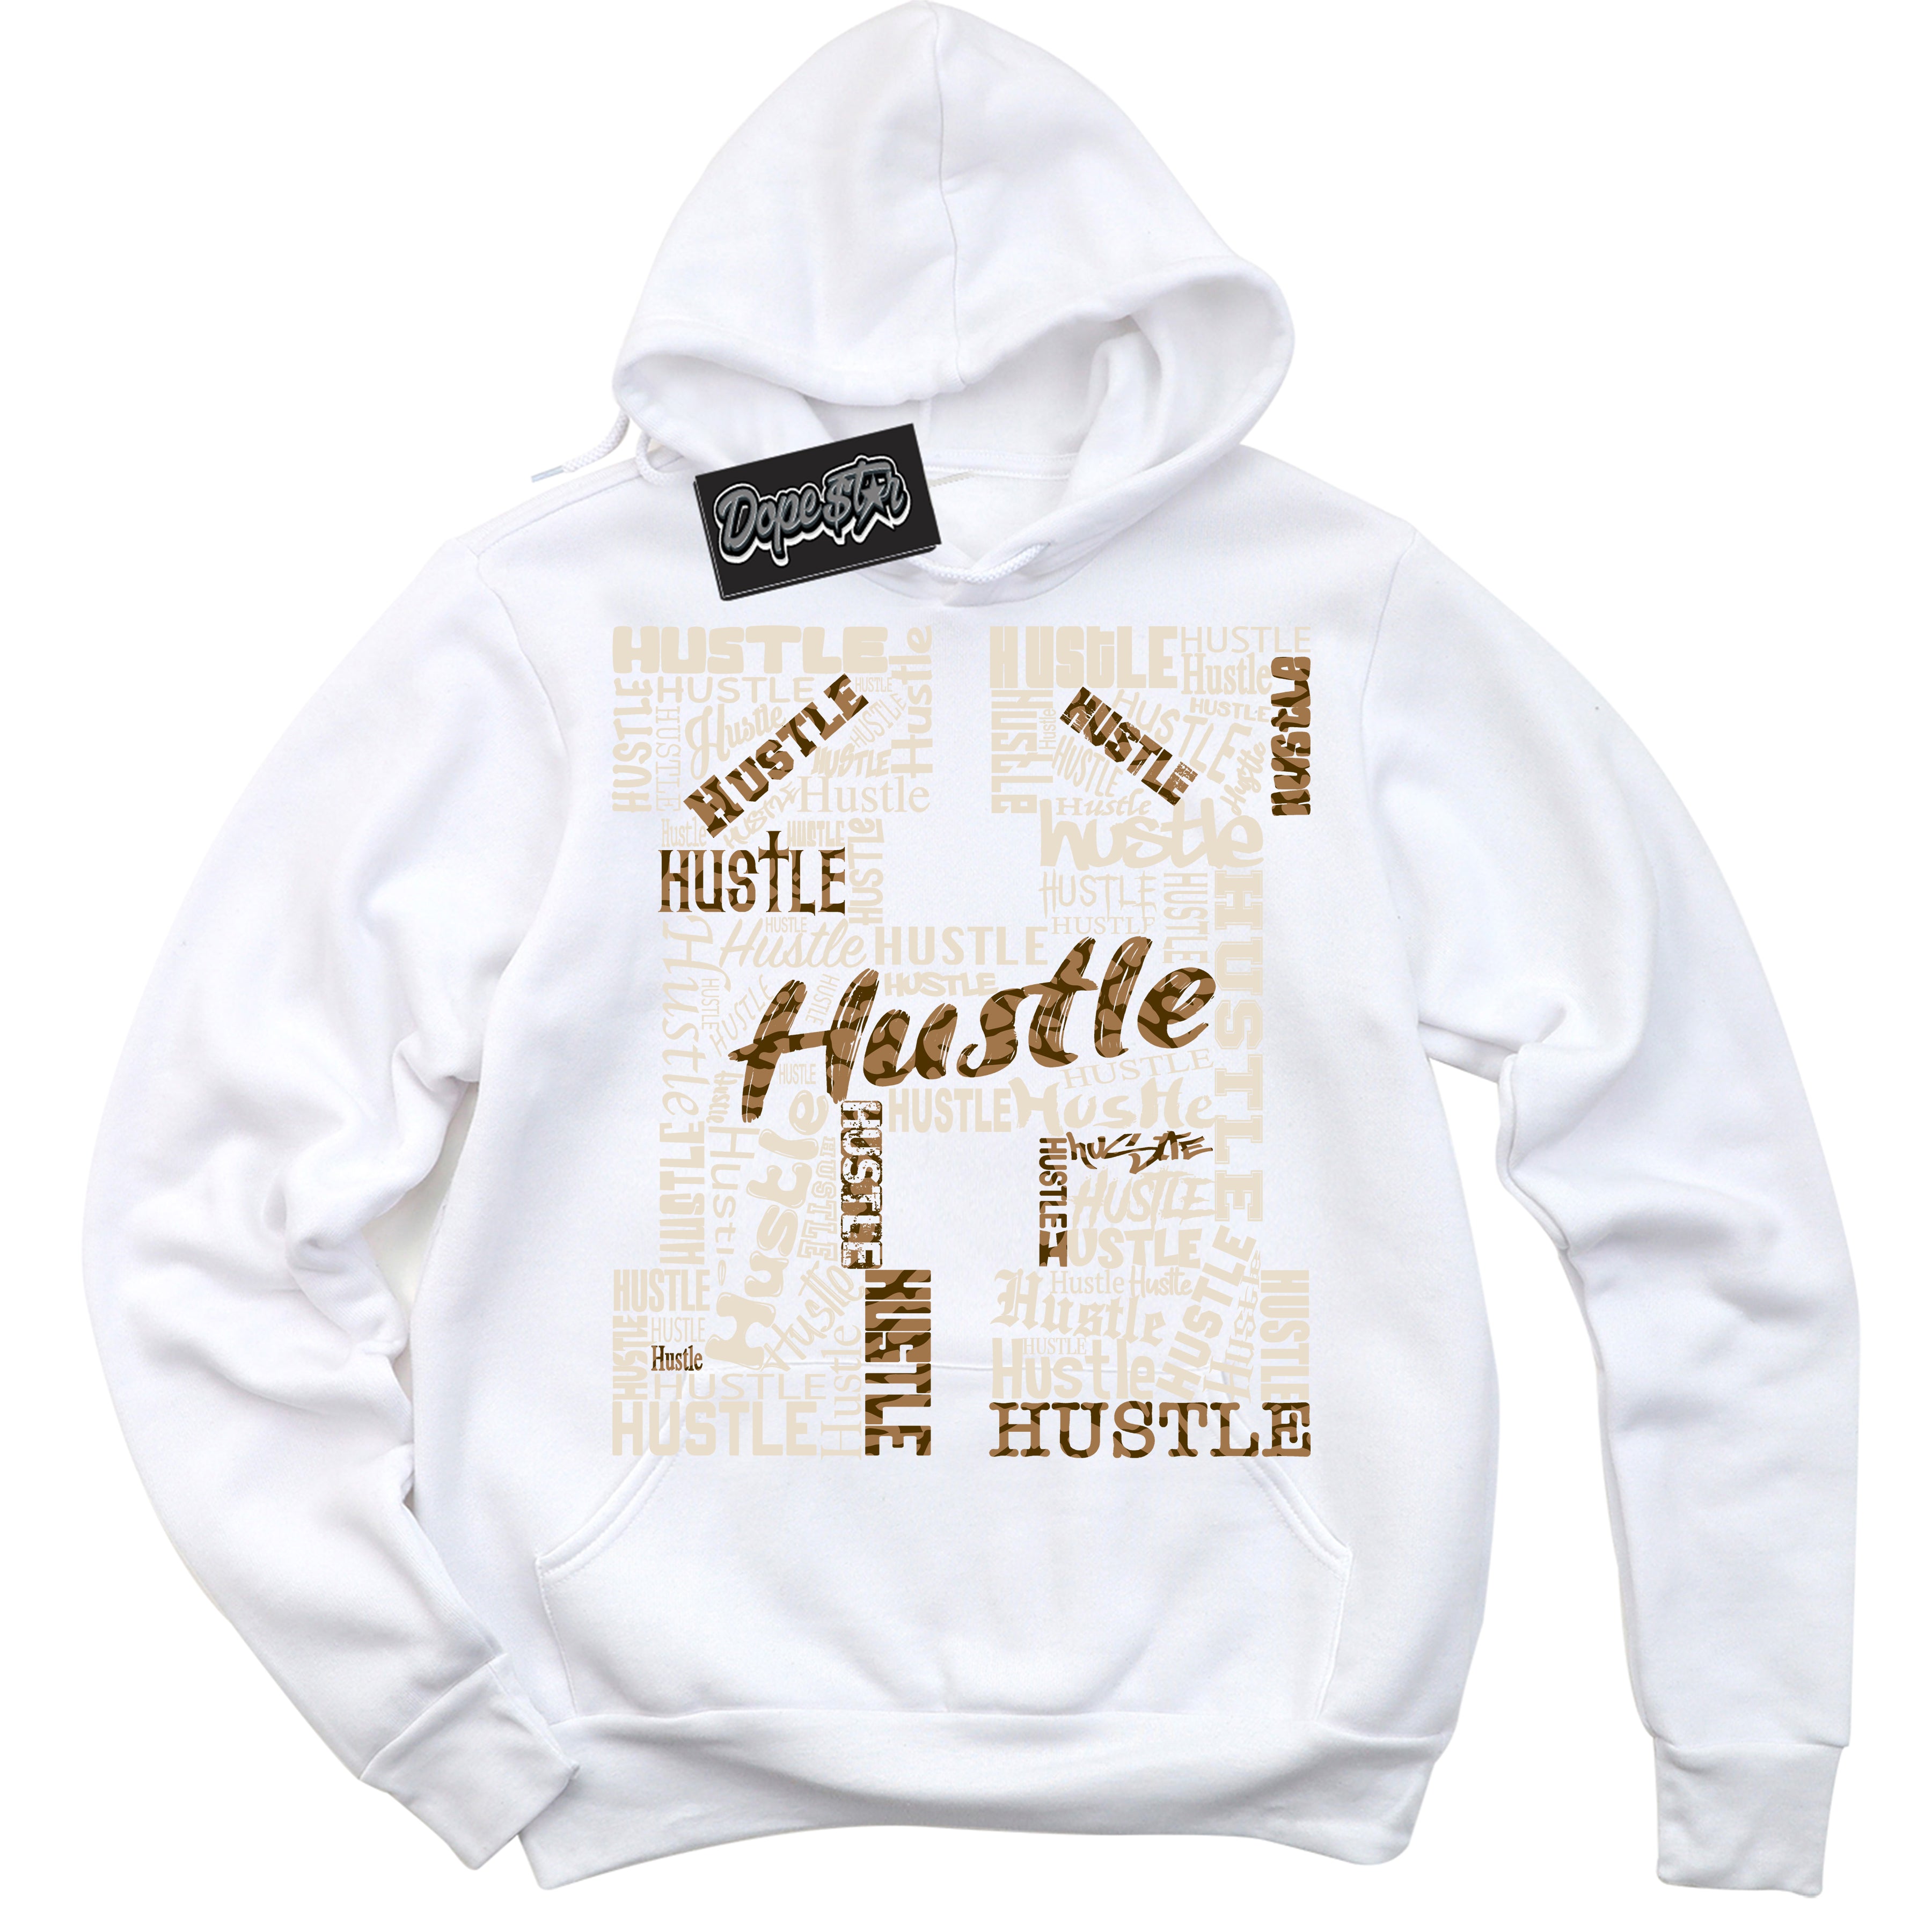 Cool White Graphic DopeStar Hoodie with “ Hustle H “ print, that perfectly matches Palomino 3s sneakers